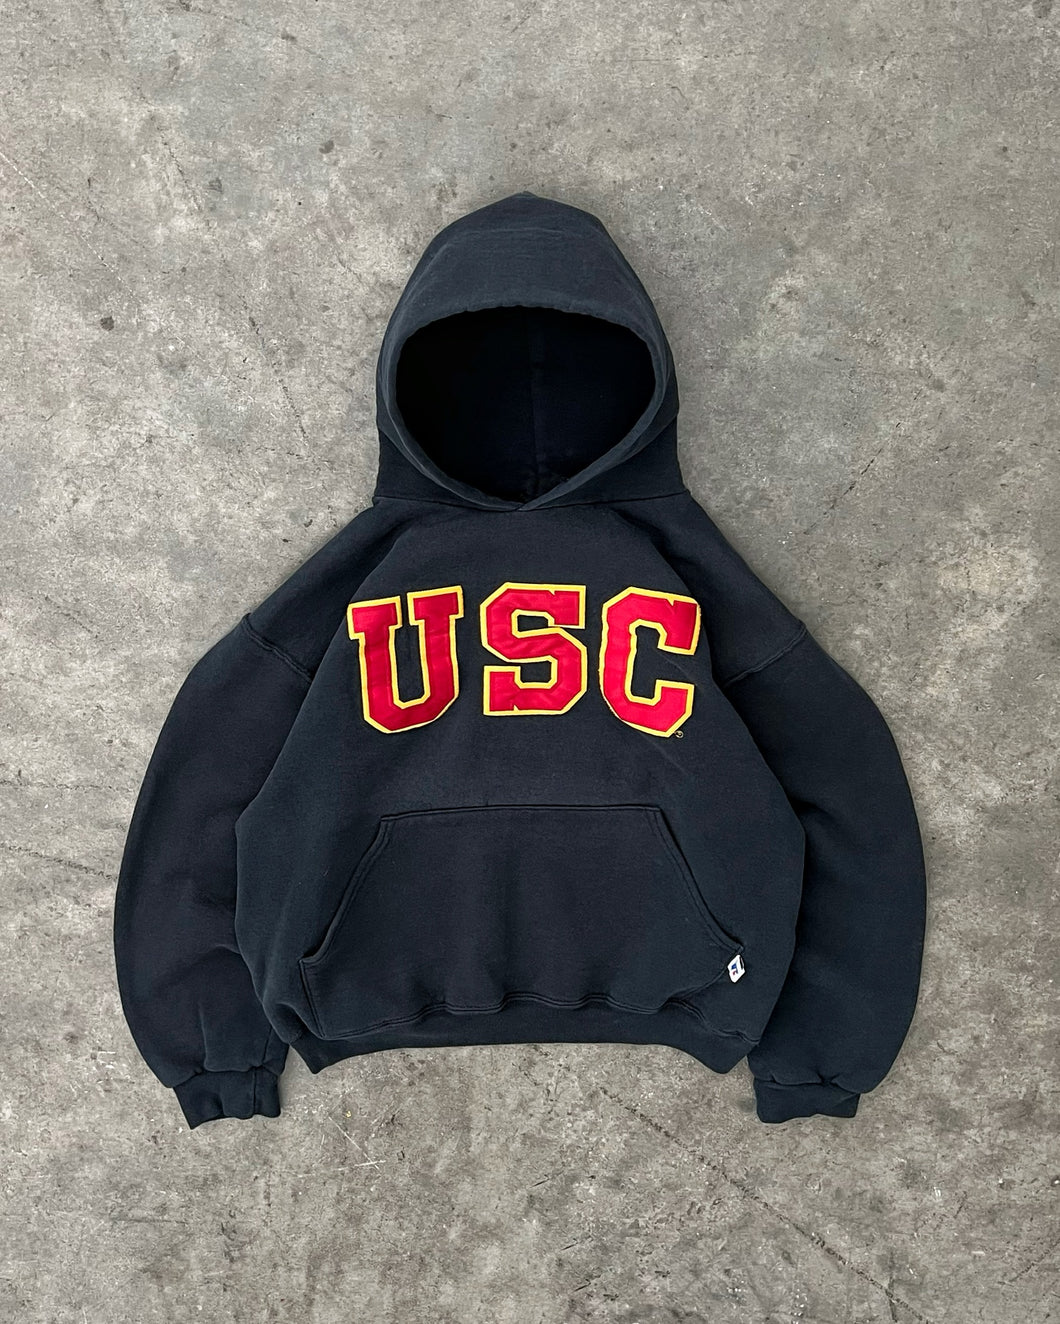 FADED BLACK “USC” RUSSELL HOODIE - 1990S